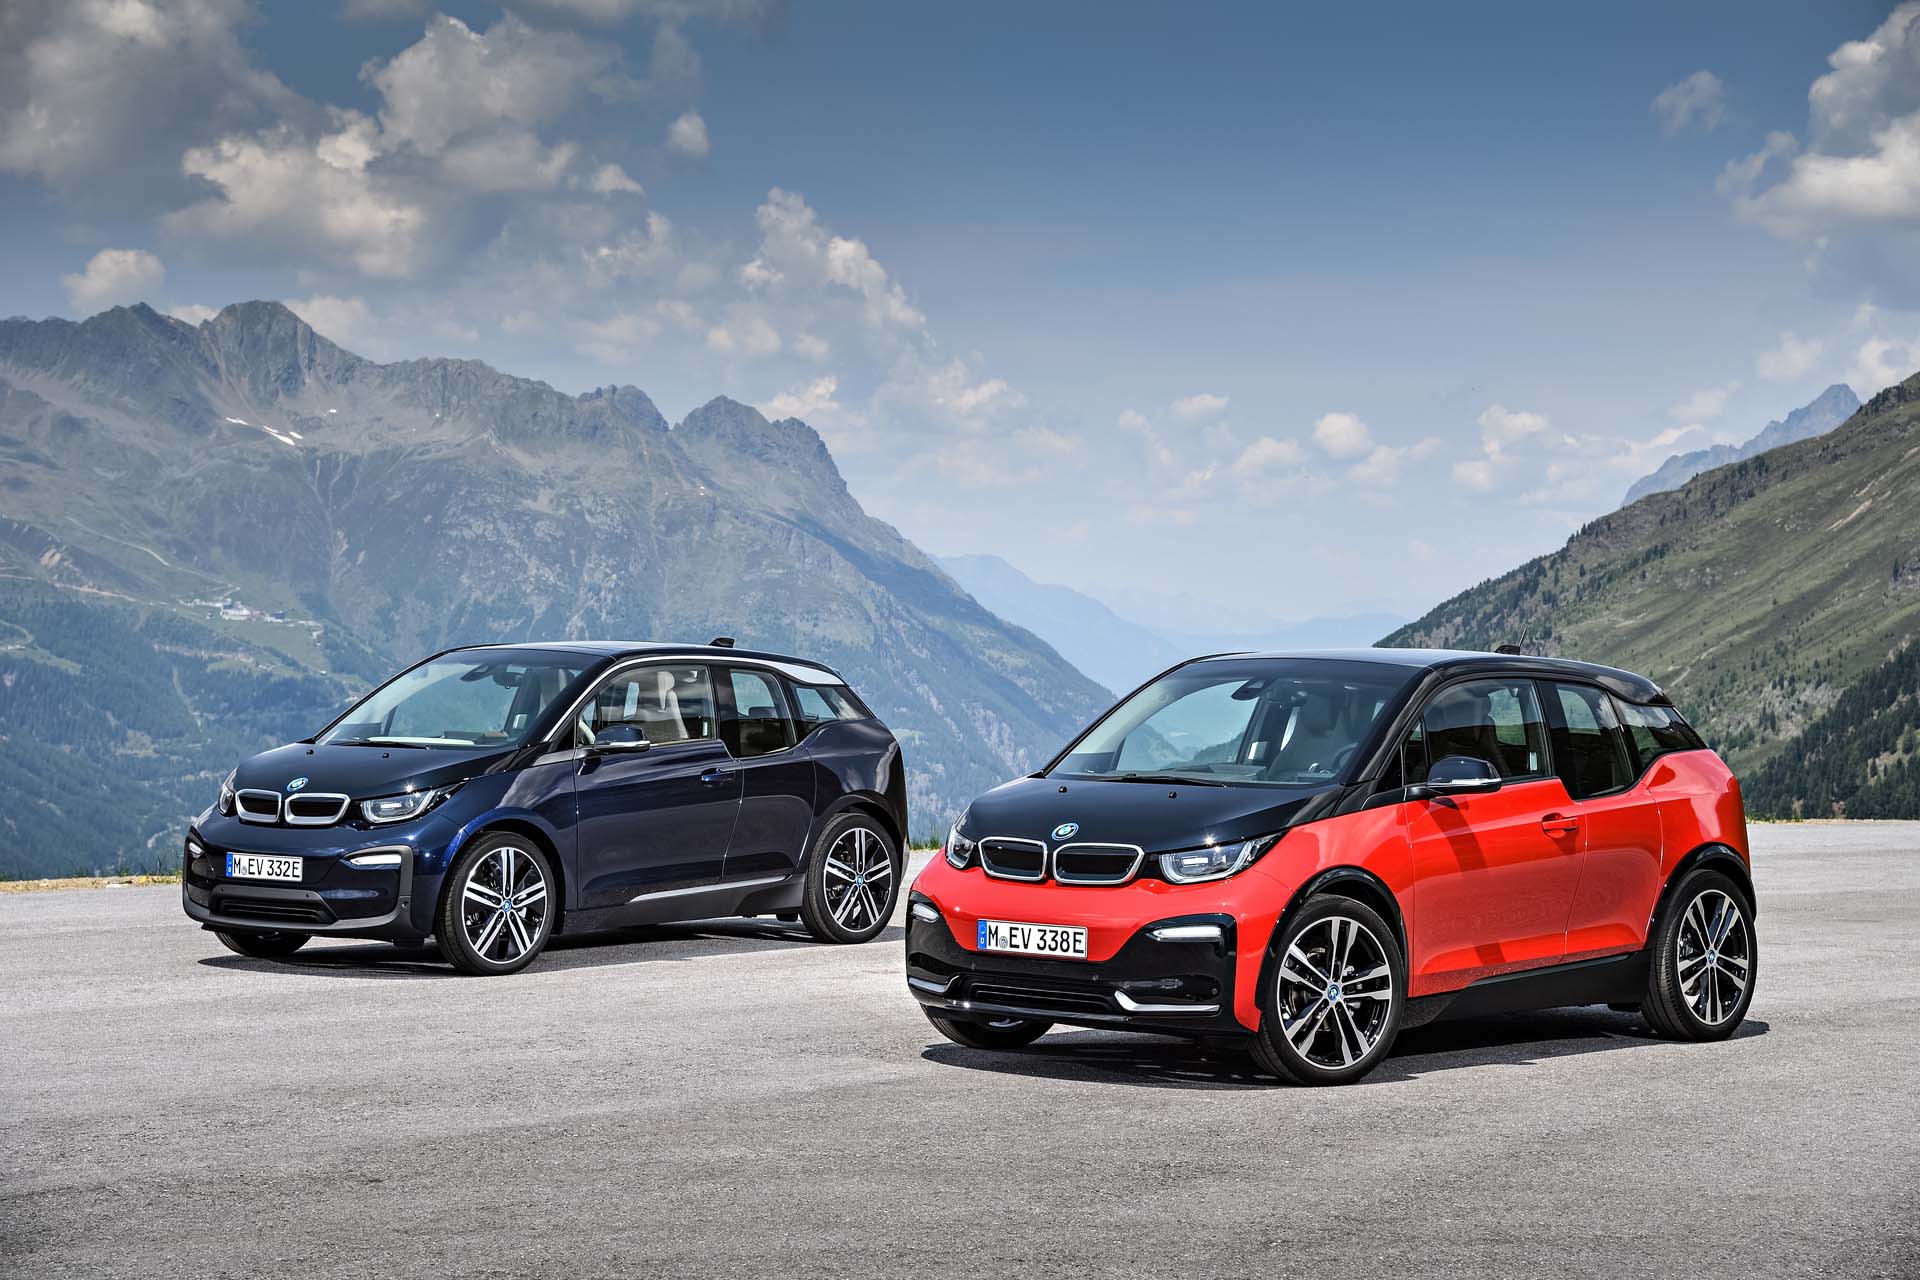 bmw i3 electric car sales stopped future recall announced for specific safety concern